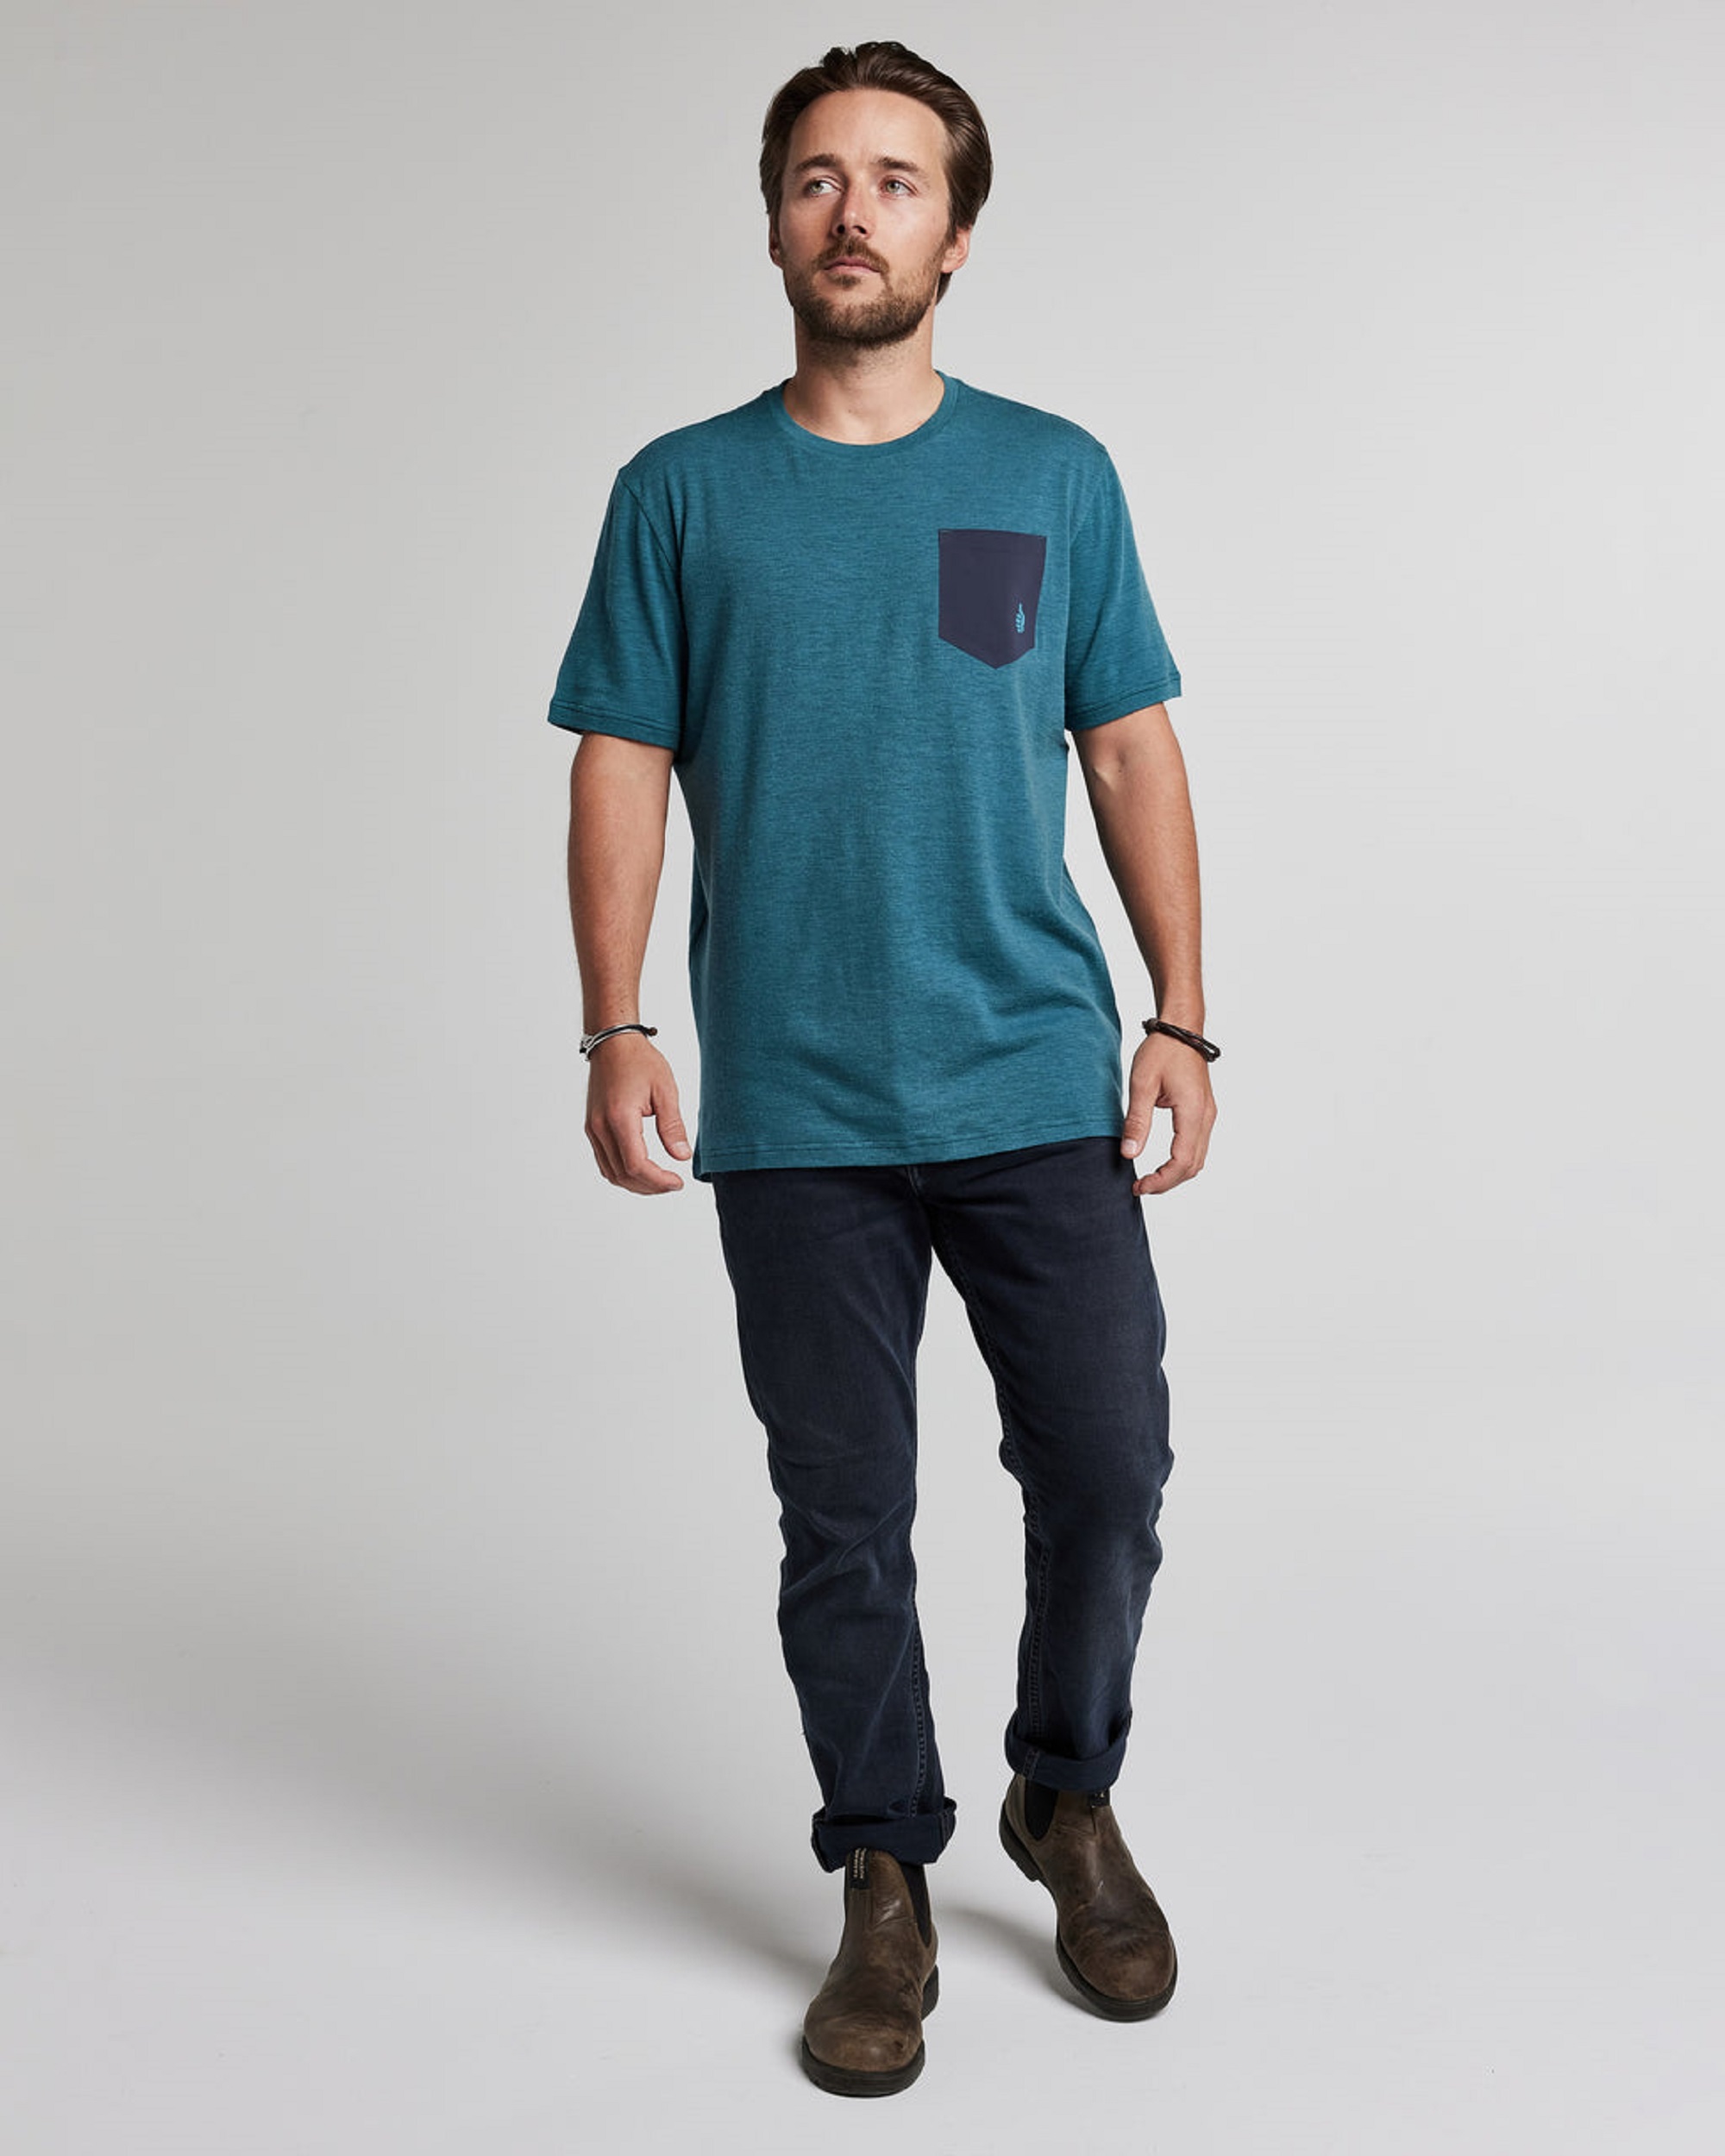 NEW NEW NEW🔥 We now have smartwool products, including t-shirts